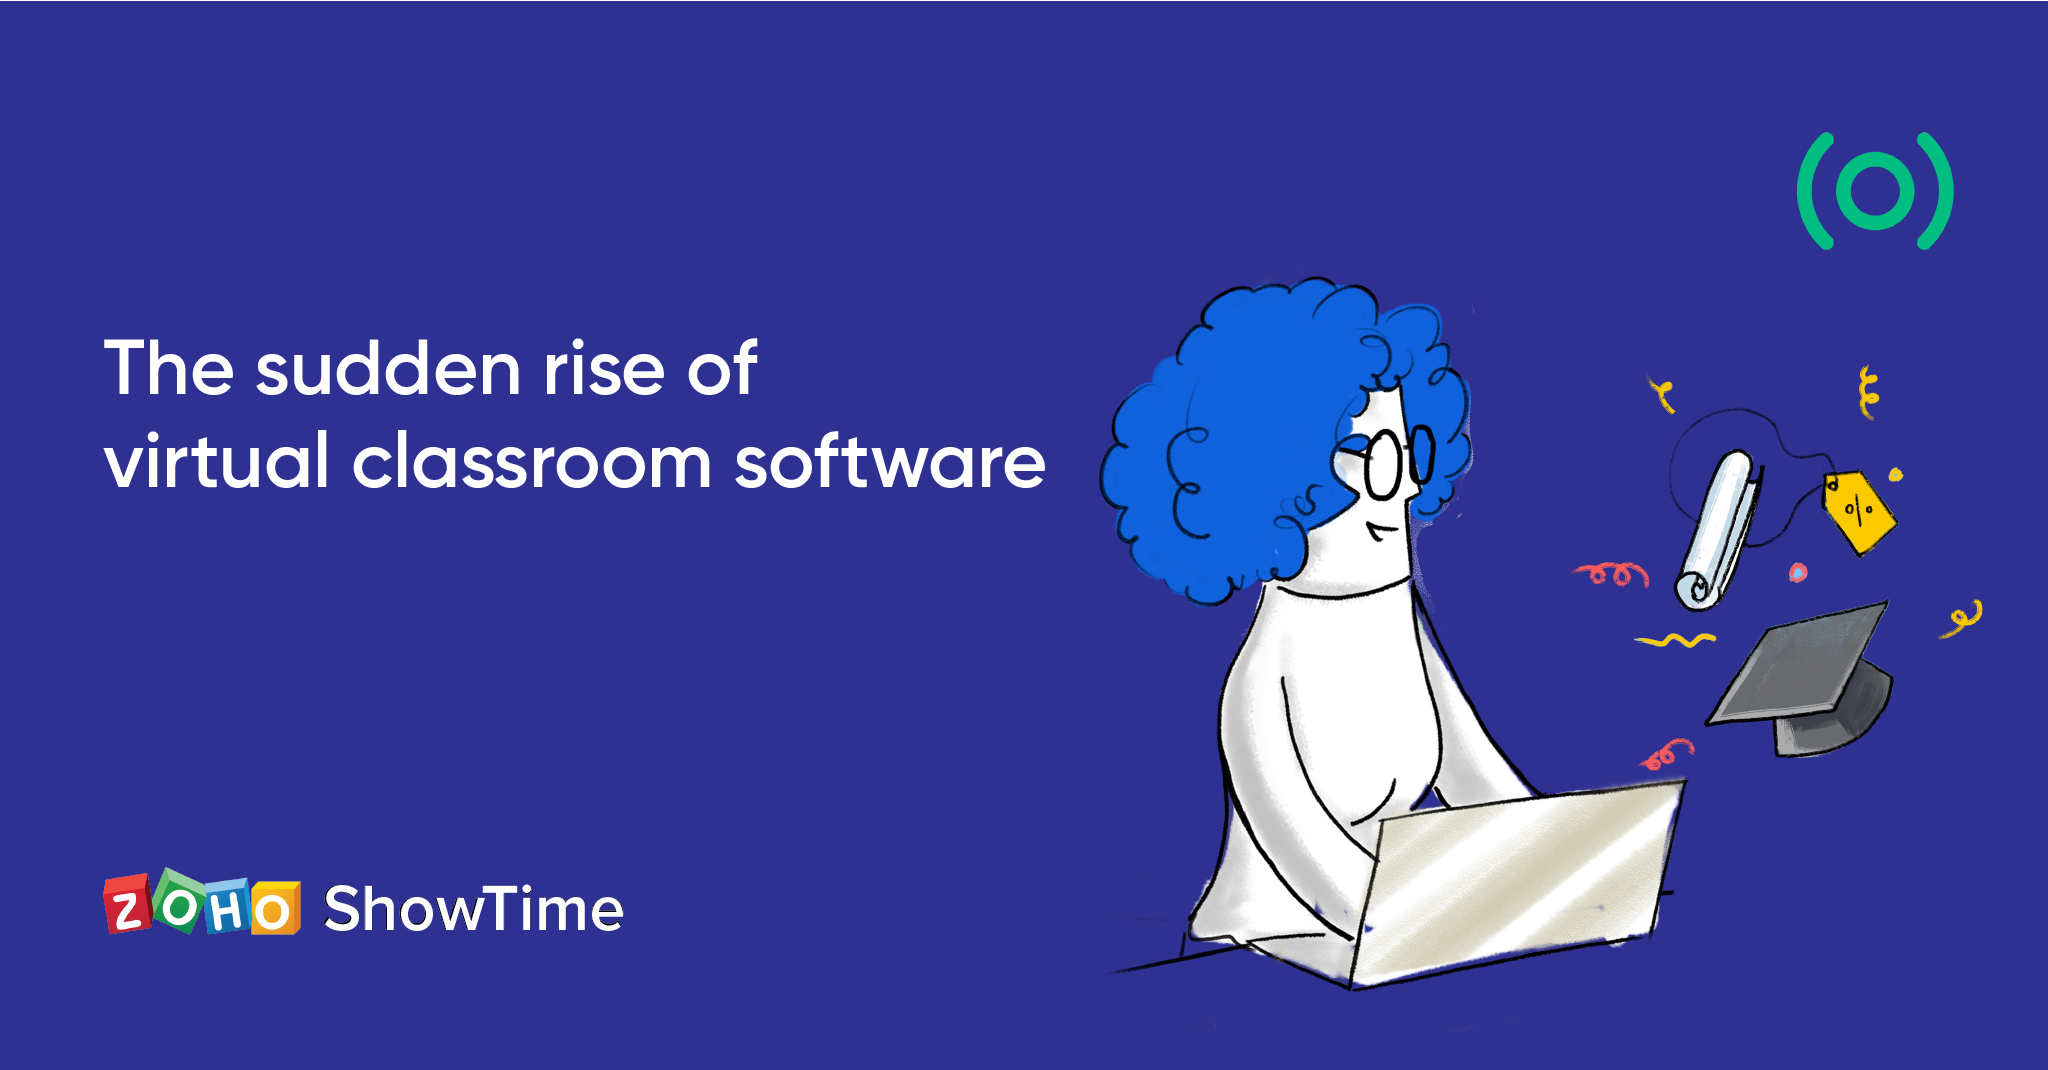 The sudden rise of virtual classroom software